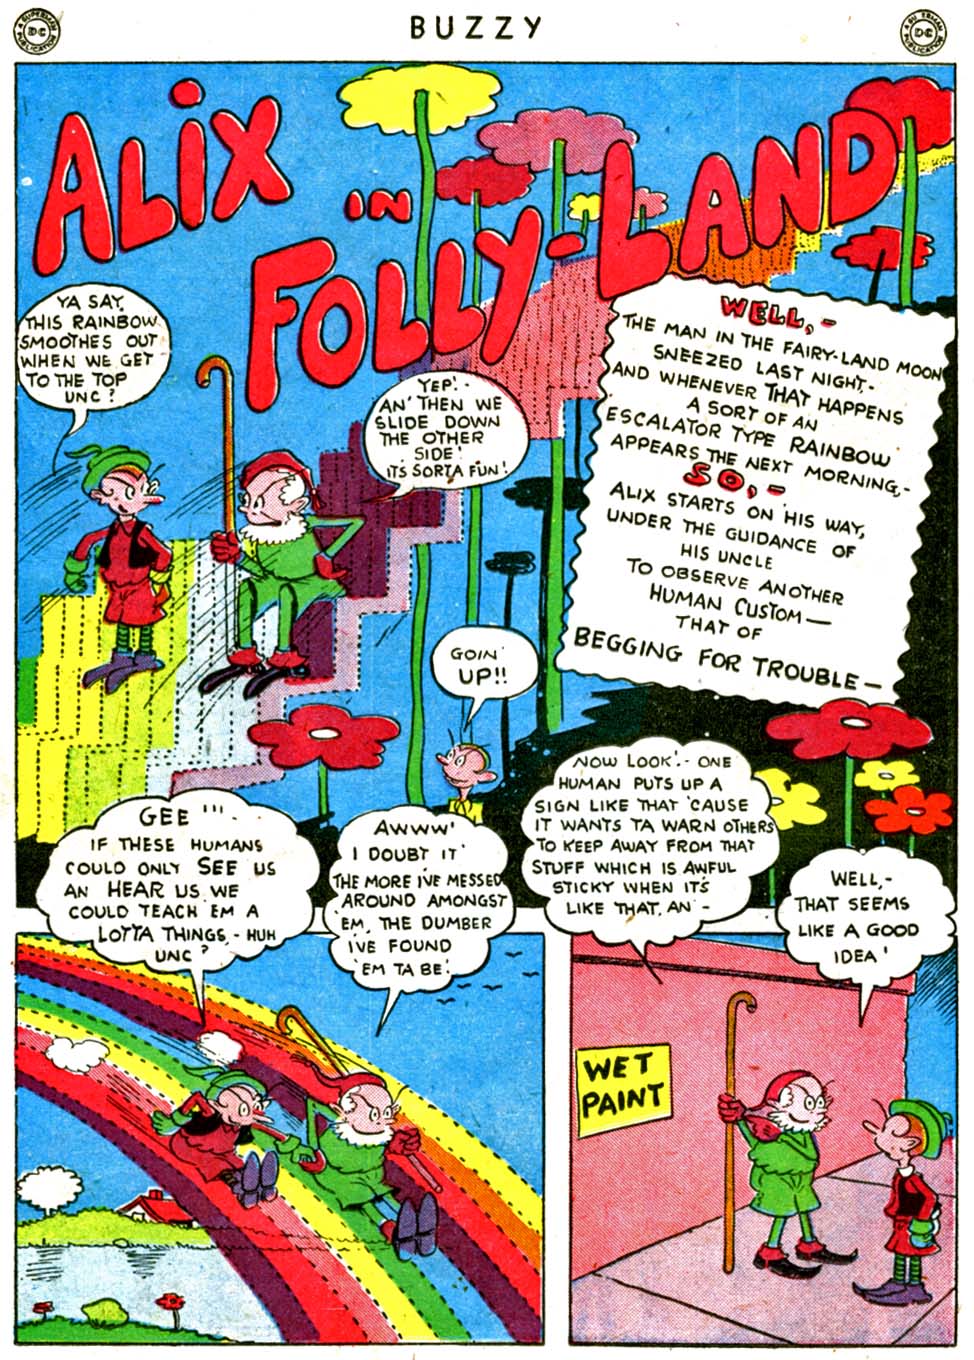 Read online Buzzy comic -  Issue #3 - 38